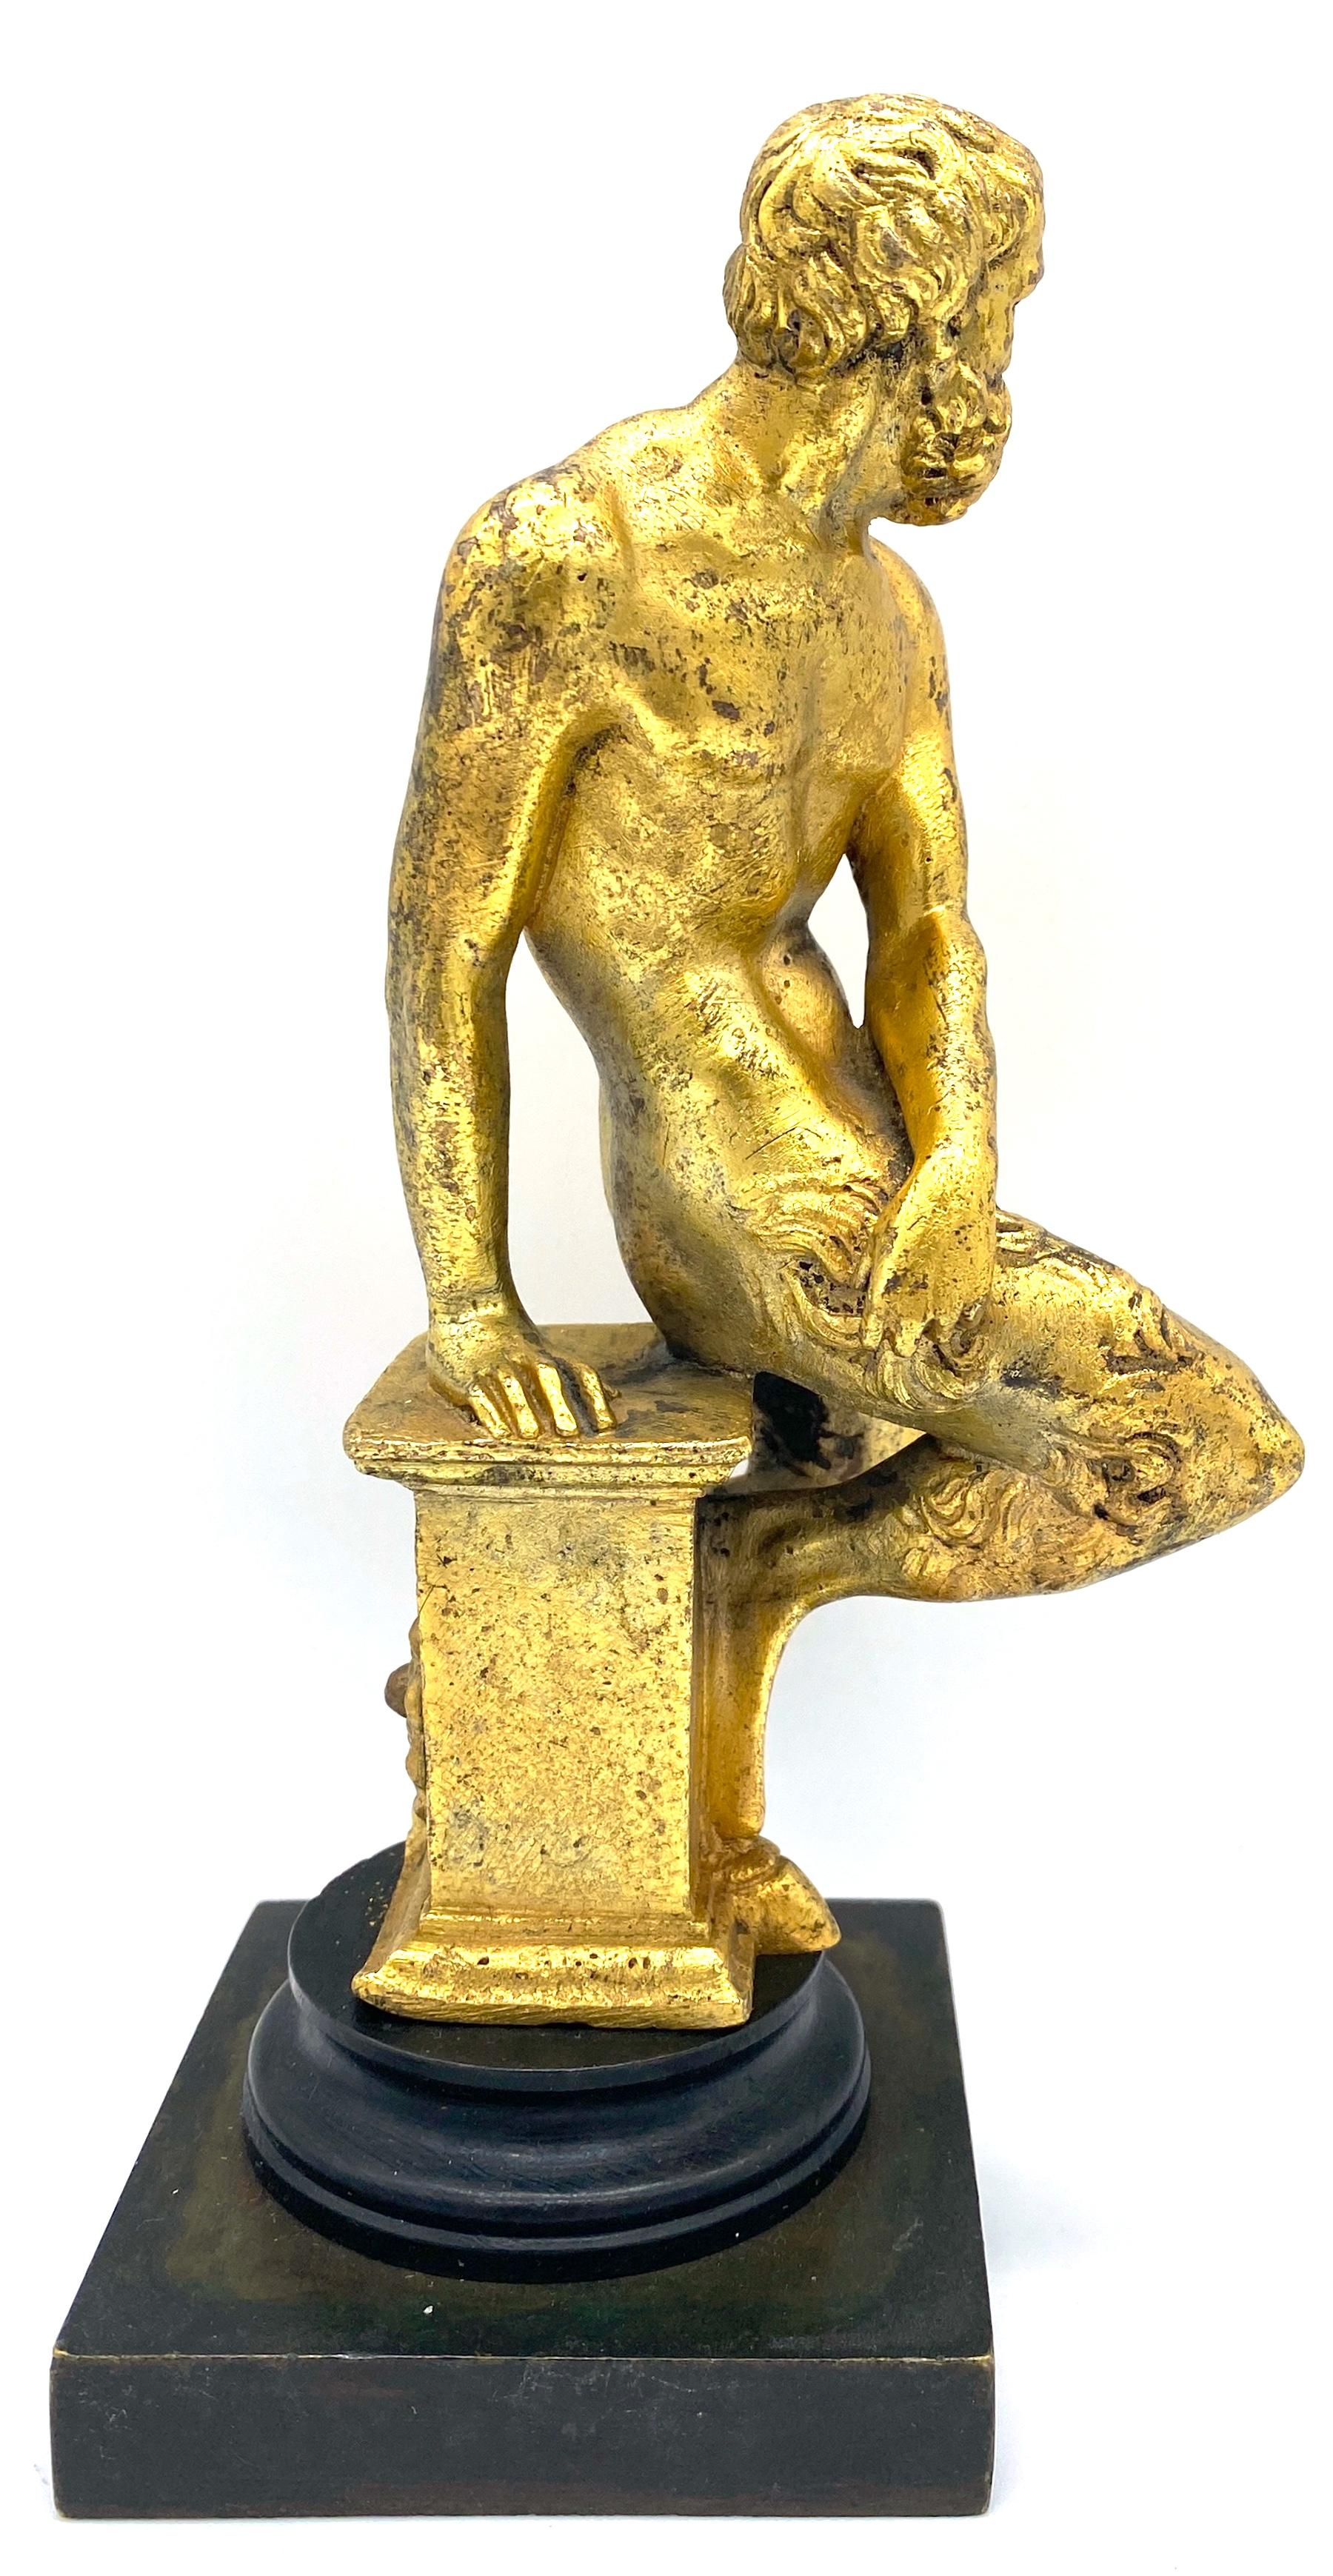 19th Century French Ormolu & Patinated Bronze Sculpture of a Seated Satyr  For Sale 1